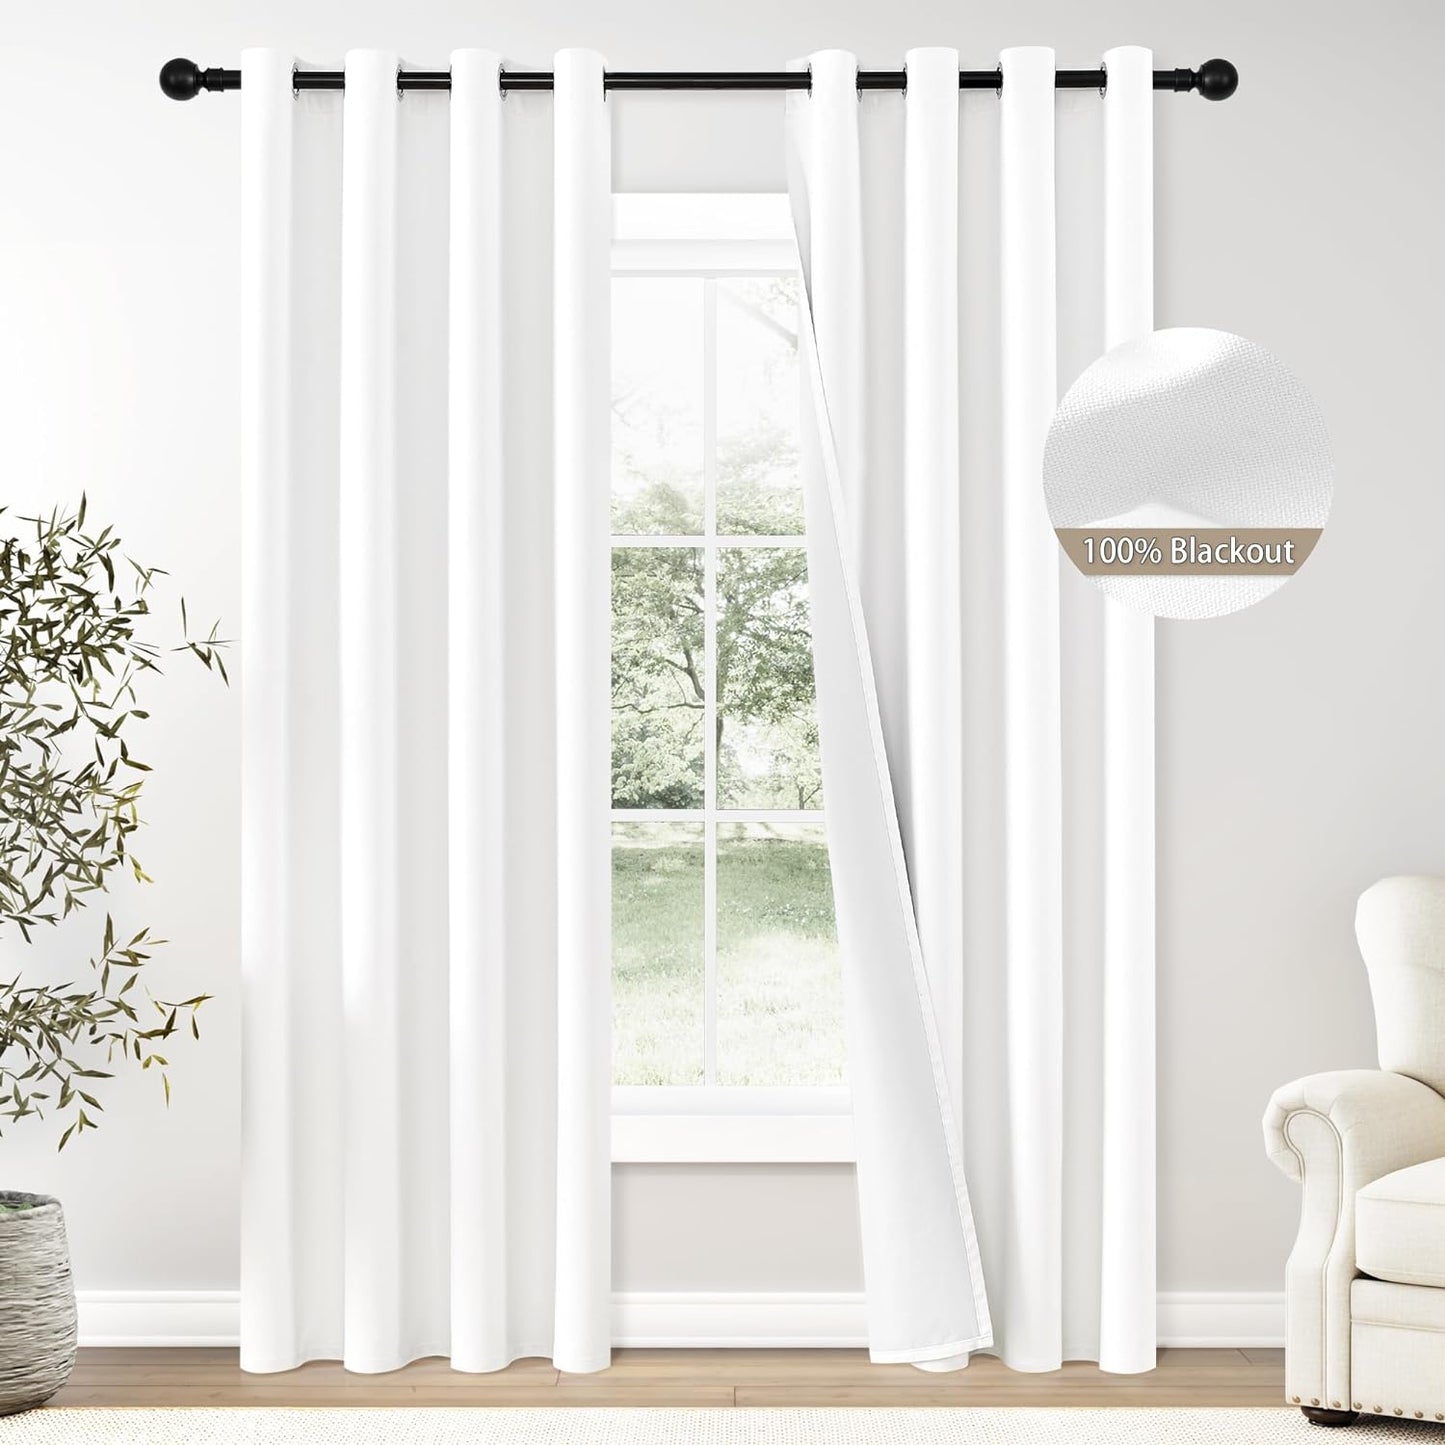 Full Blackout Curtains 84 Inches Long for Bedroom, Neutral Flax Linen Black Out Drapes, 2 Panels Grommet Room Darkening Curtains 84 Inch Length with Backing for Living Room Light Beige 52X84  ChrisDowa Pure White 52W X 84L 